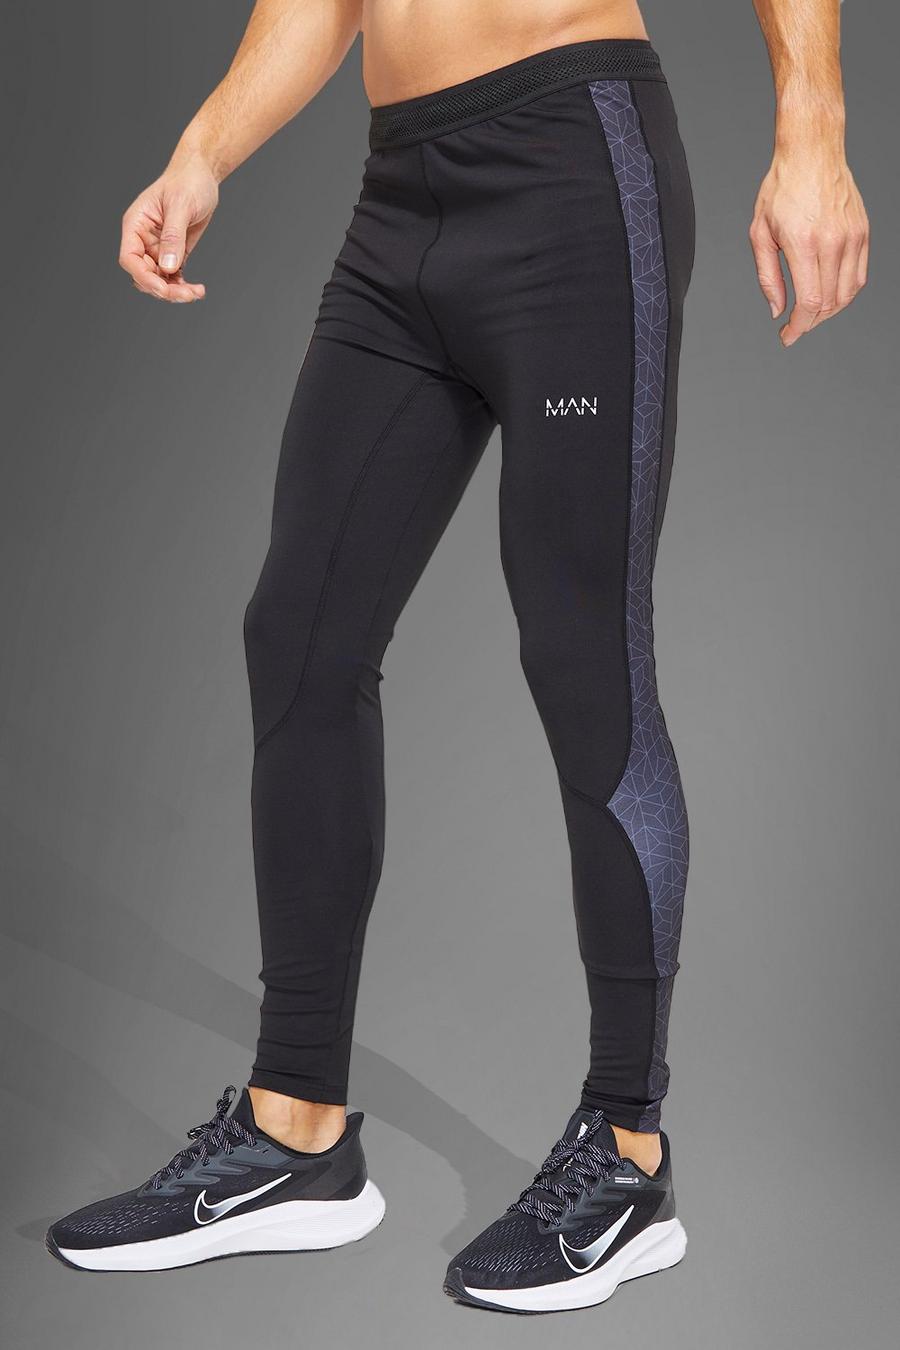 Legging Tall Man Active Gym con pannelli in jacquard, Black nero image number 1